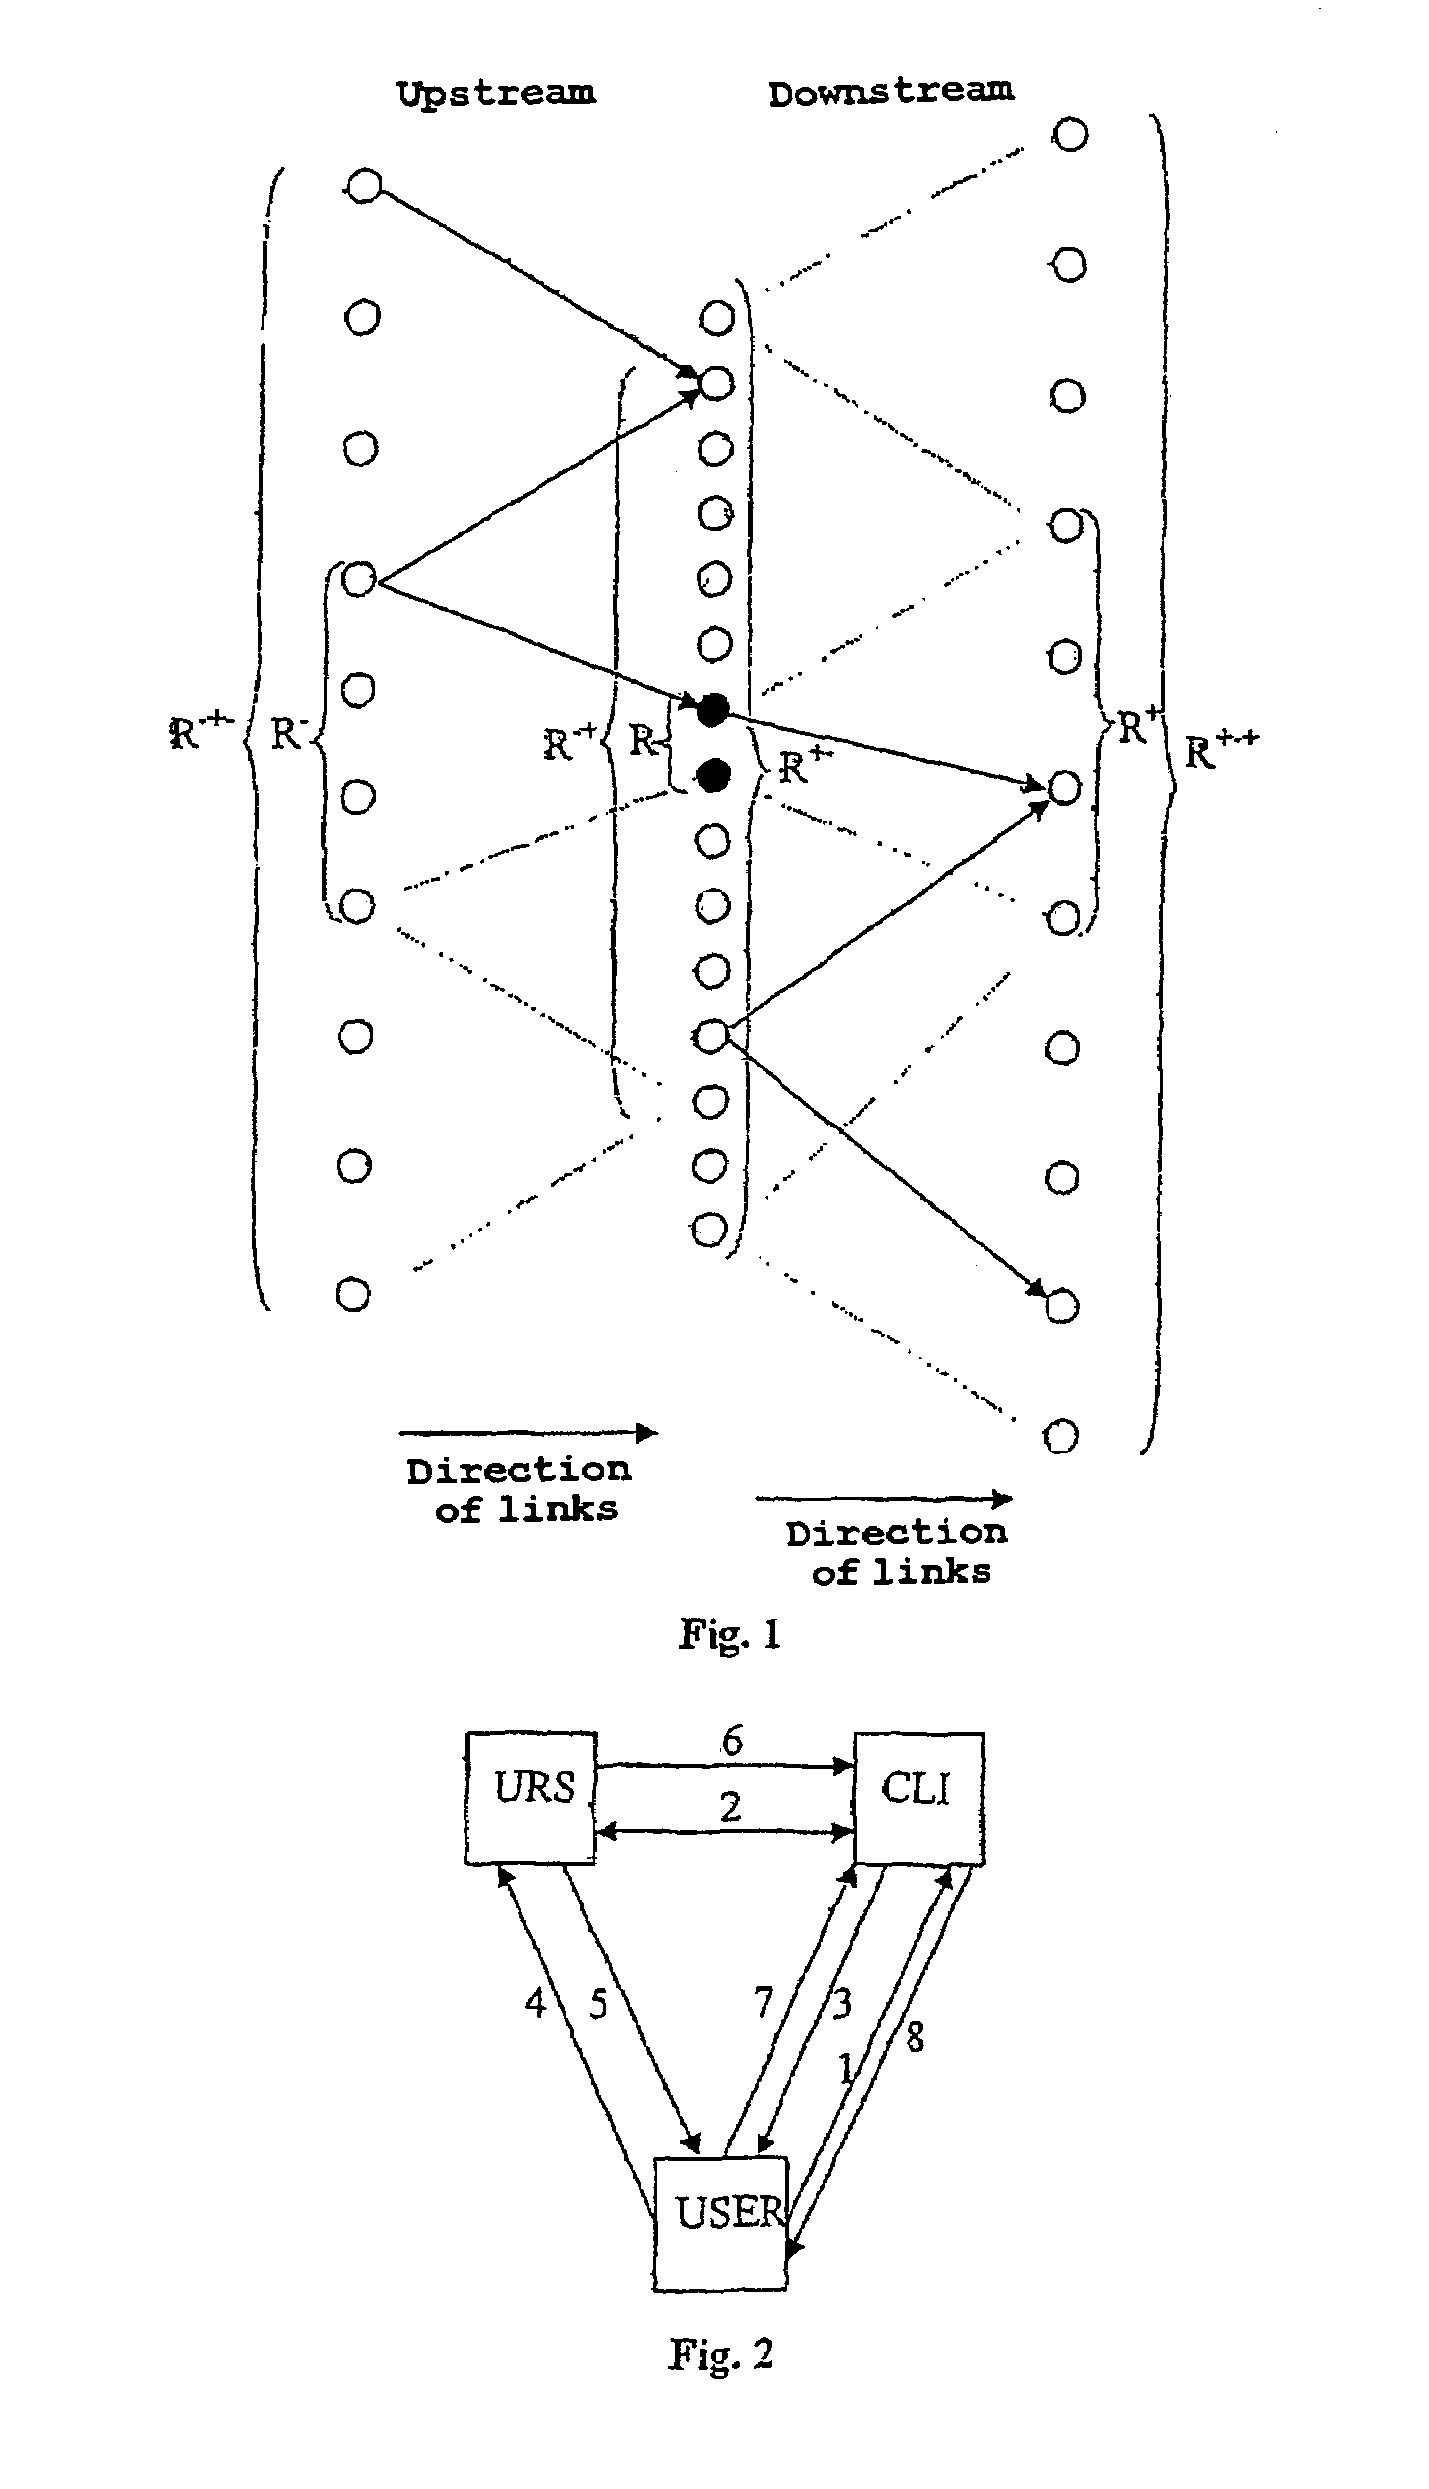 Methods and systems for searching and associating information resources such as web pages